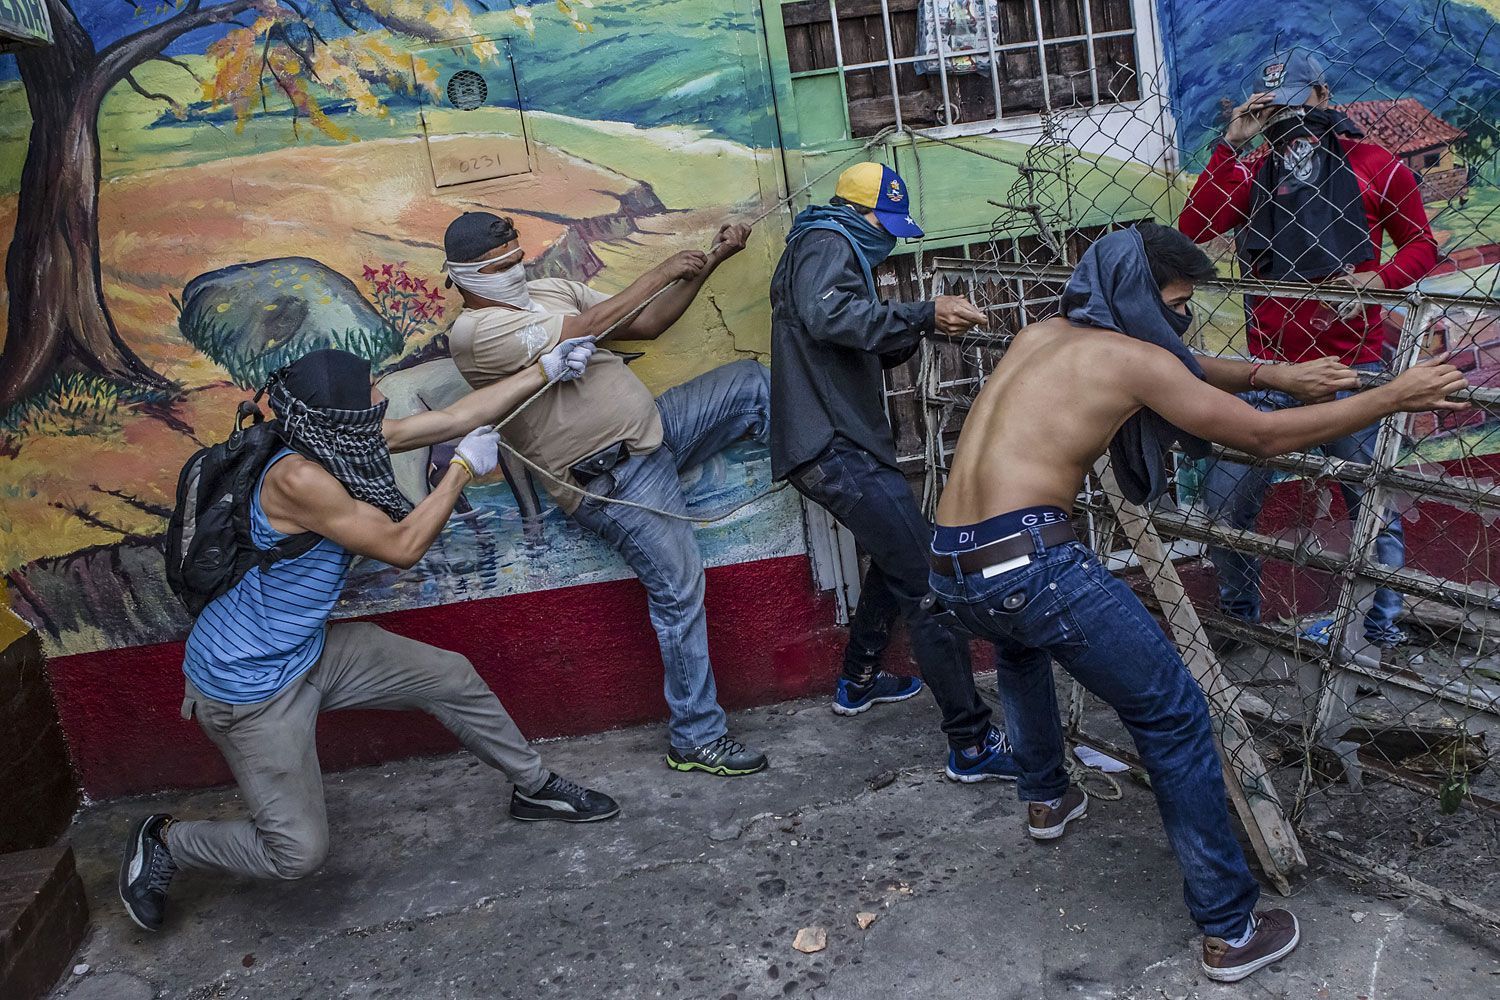 Protesters build a barrier in the Las Pilas area of San Cristobal, Feb. 24, 2014. The capital of Tachira State, bordering Colombia, is the site of the some of the fiercest protests against the government of President Nicolas Maduro.